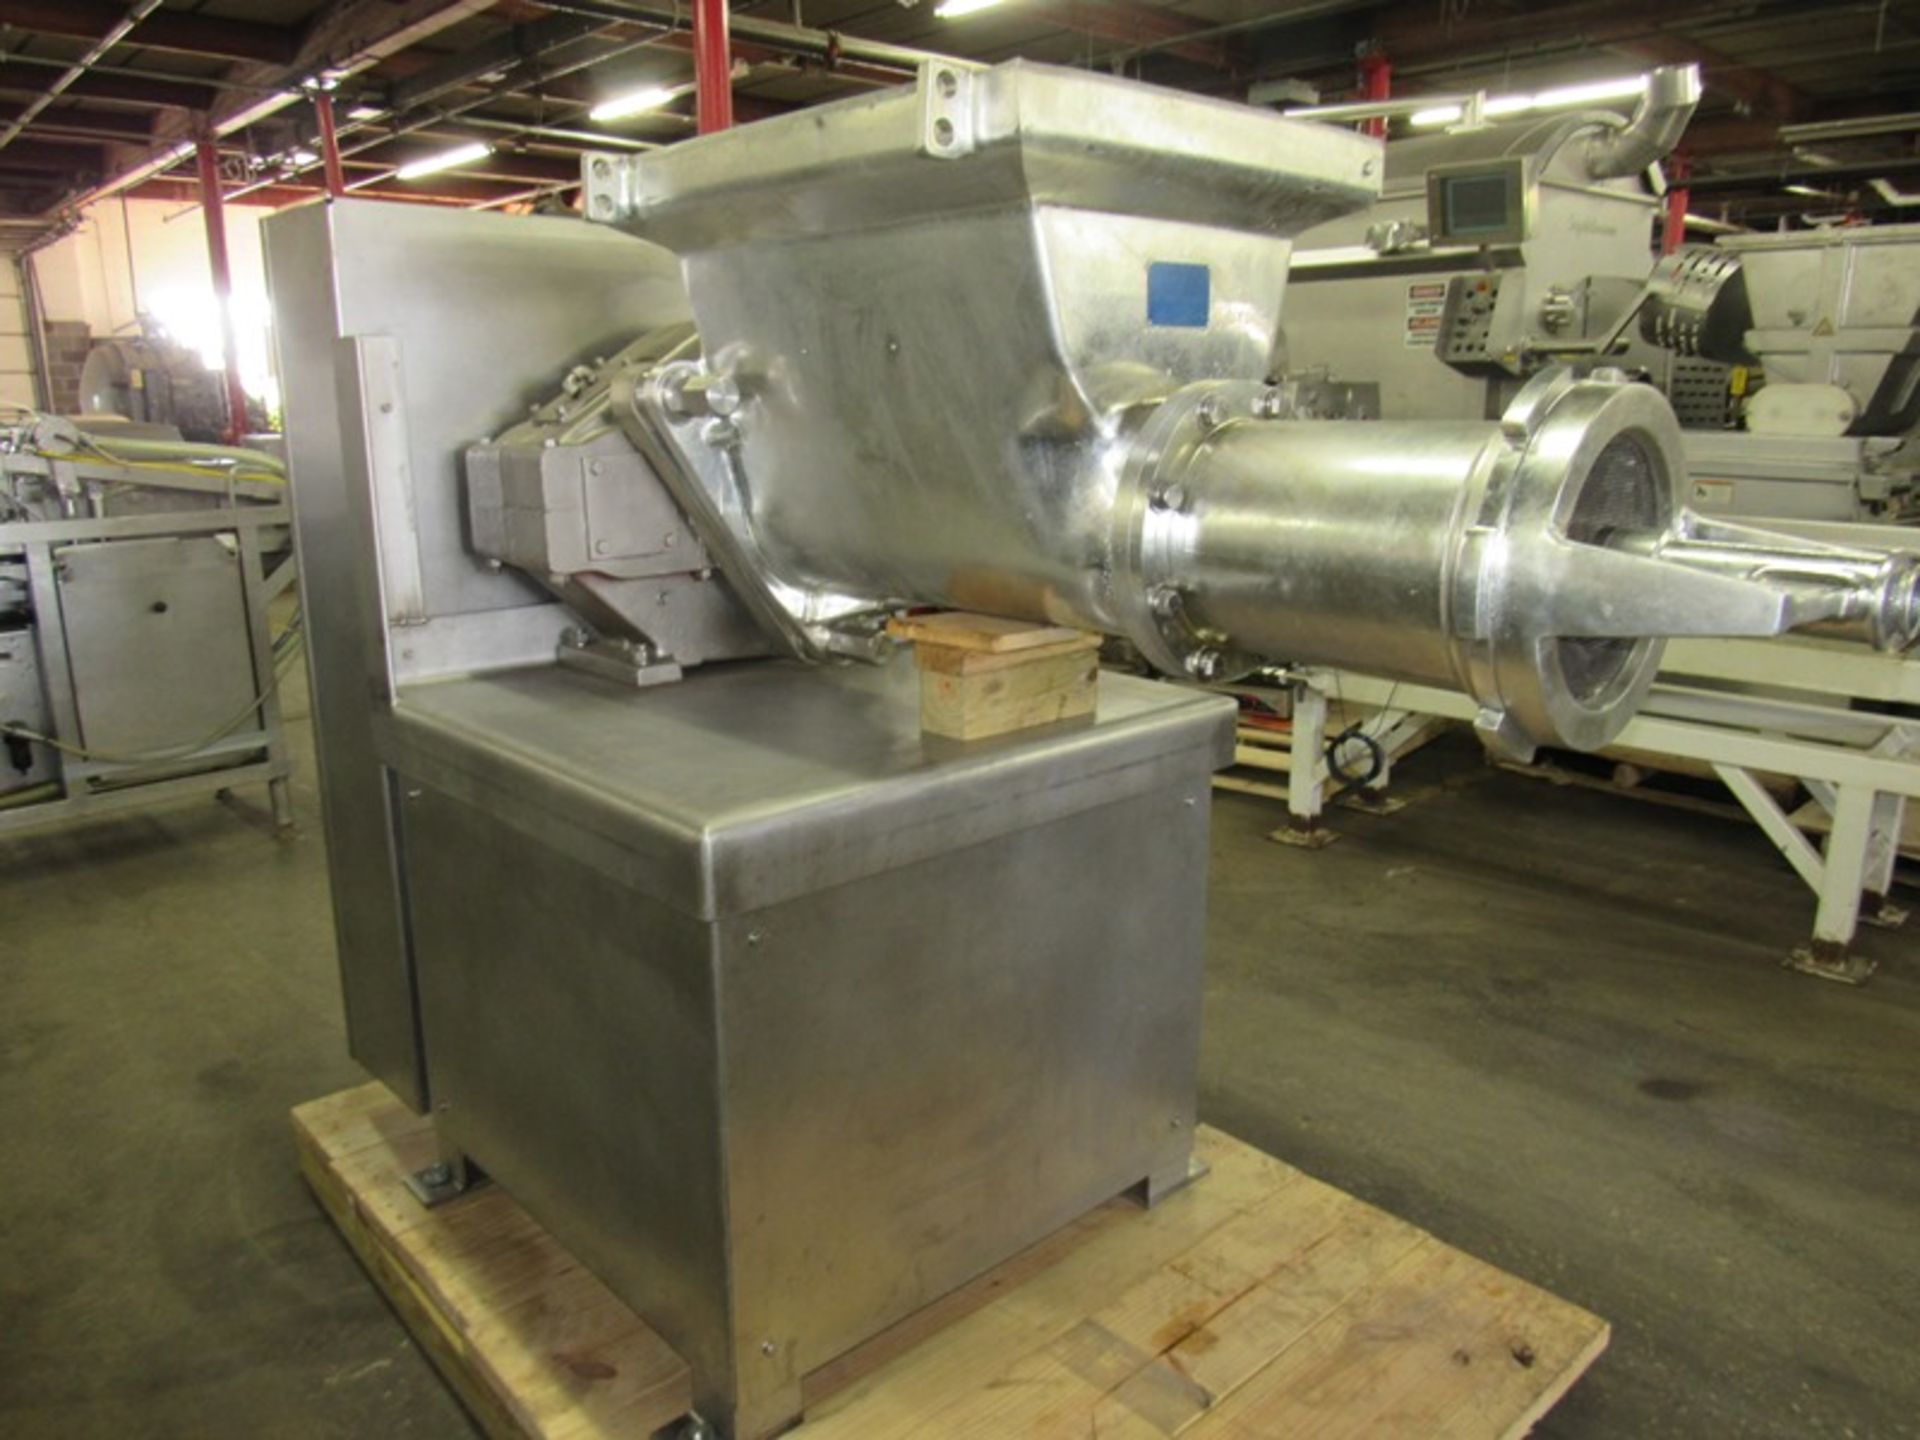 Weiler Mdl. 1109 Grinder, Refurbished with newly tinned extended hopper and feed screw, barrel - Image 2 of 18